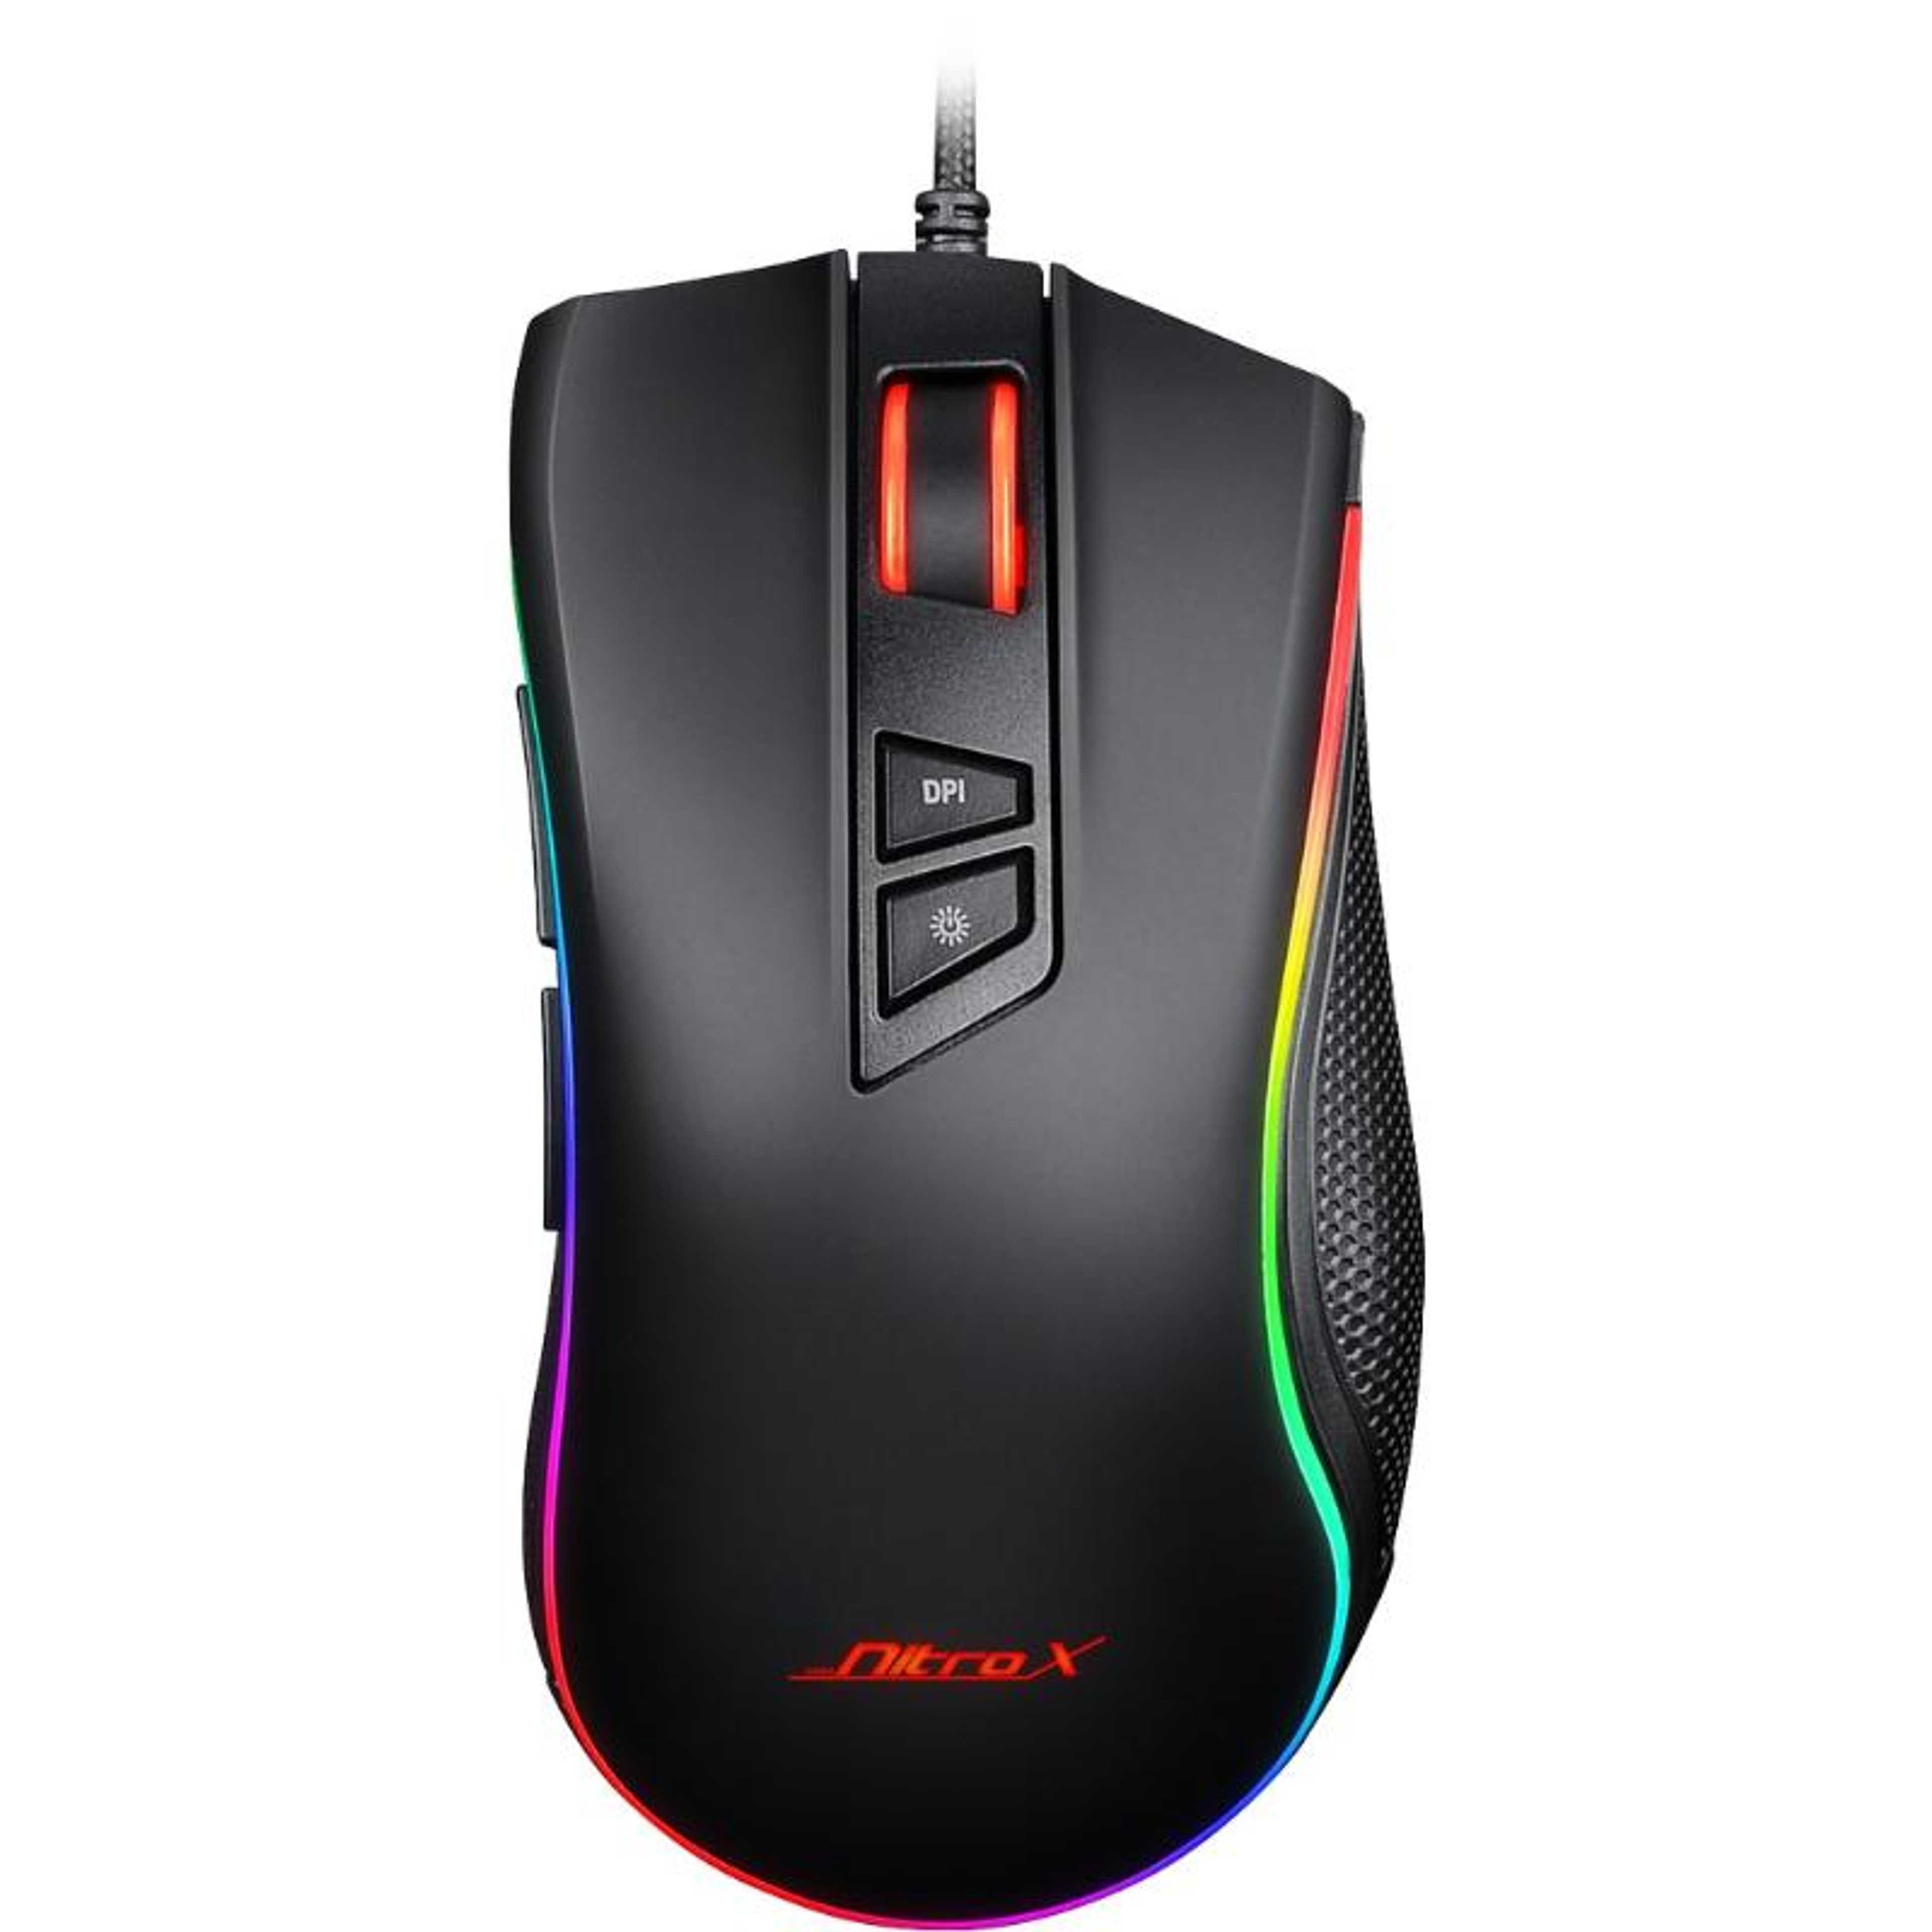 Nitrox GT-300+ Pro Gaming Gear- RGB Gaming Mouse -Avago 3050 Gaming Sensor -1000hz Polling rate -Software Customization